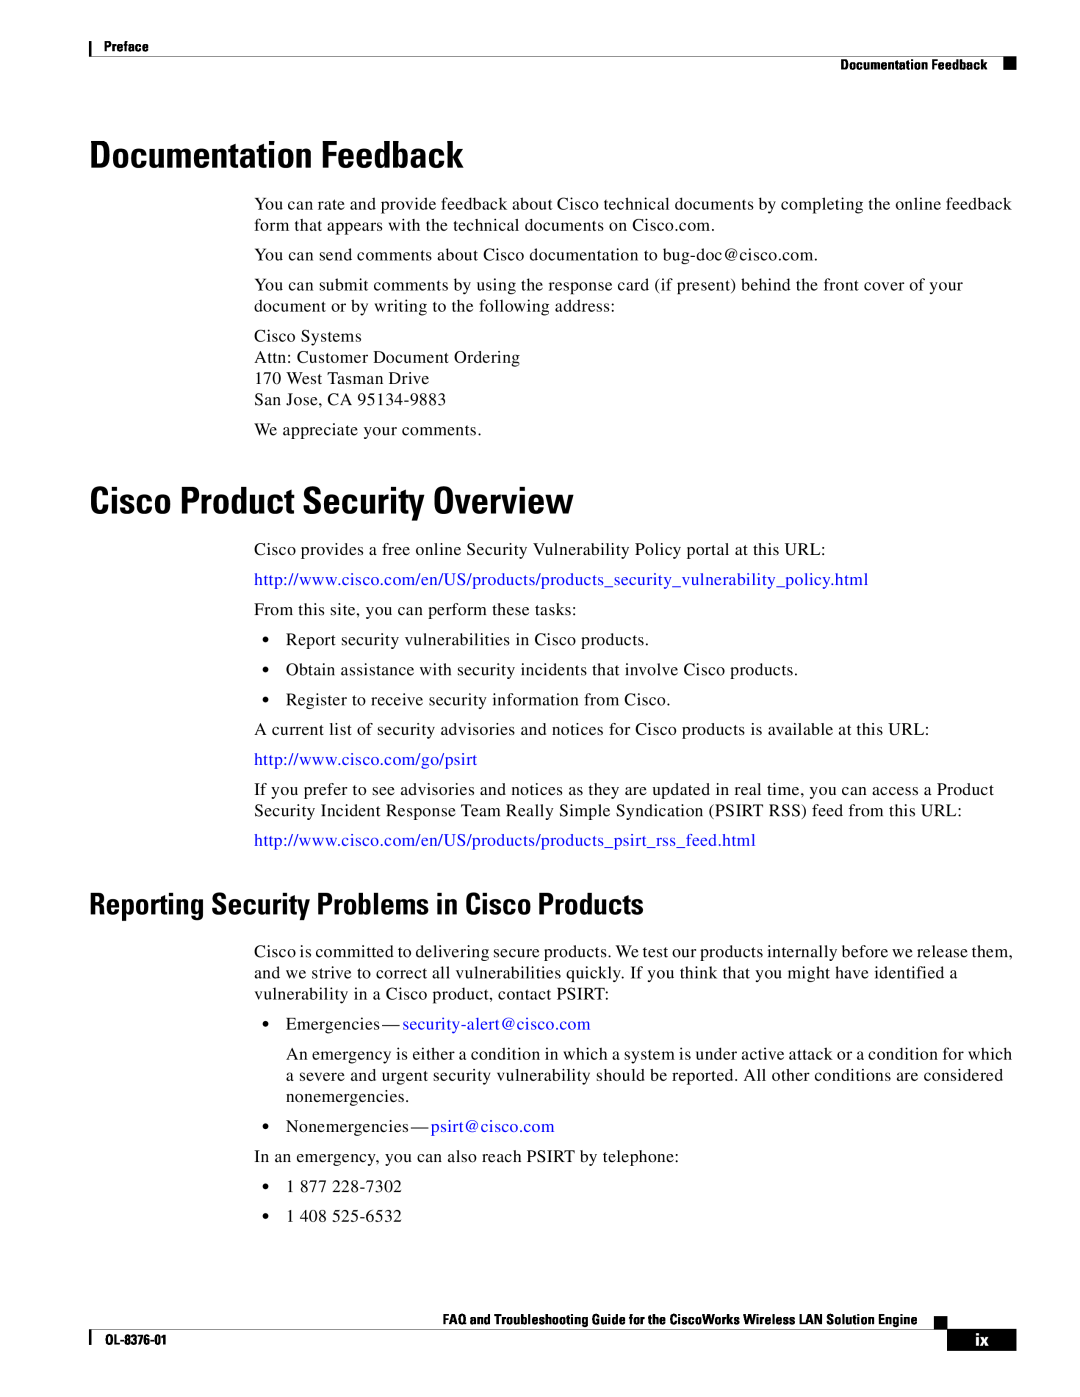 Cisco Systems OL-8376-01 manual Documentation Feedback, Cisco Product Security Overview 